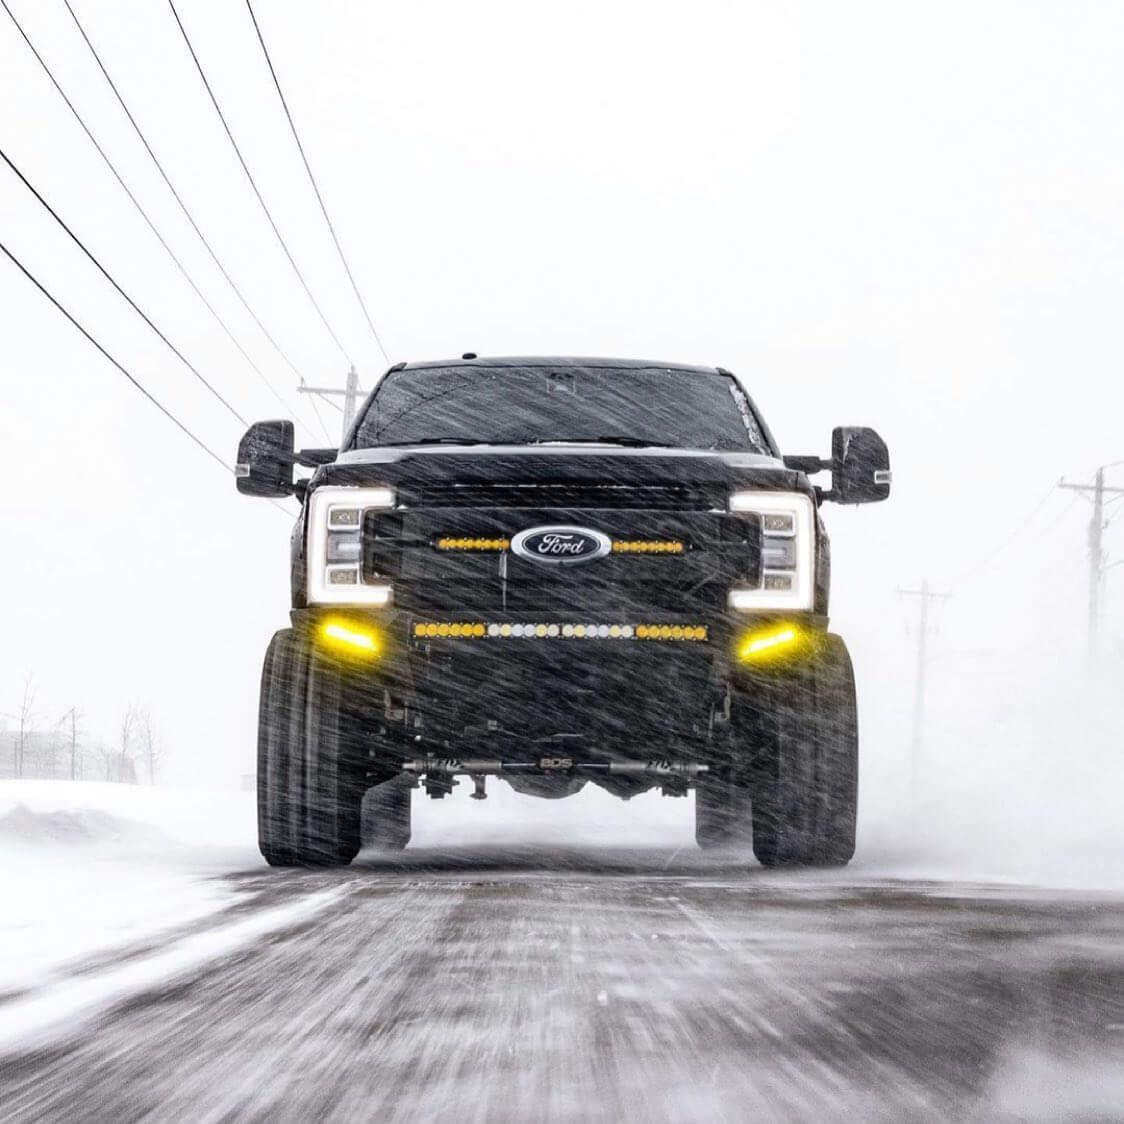 Ford off-road truck with aftermarket lighting driving in the snow